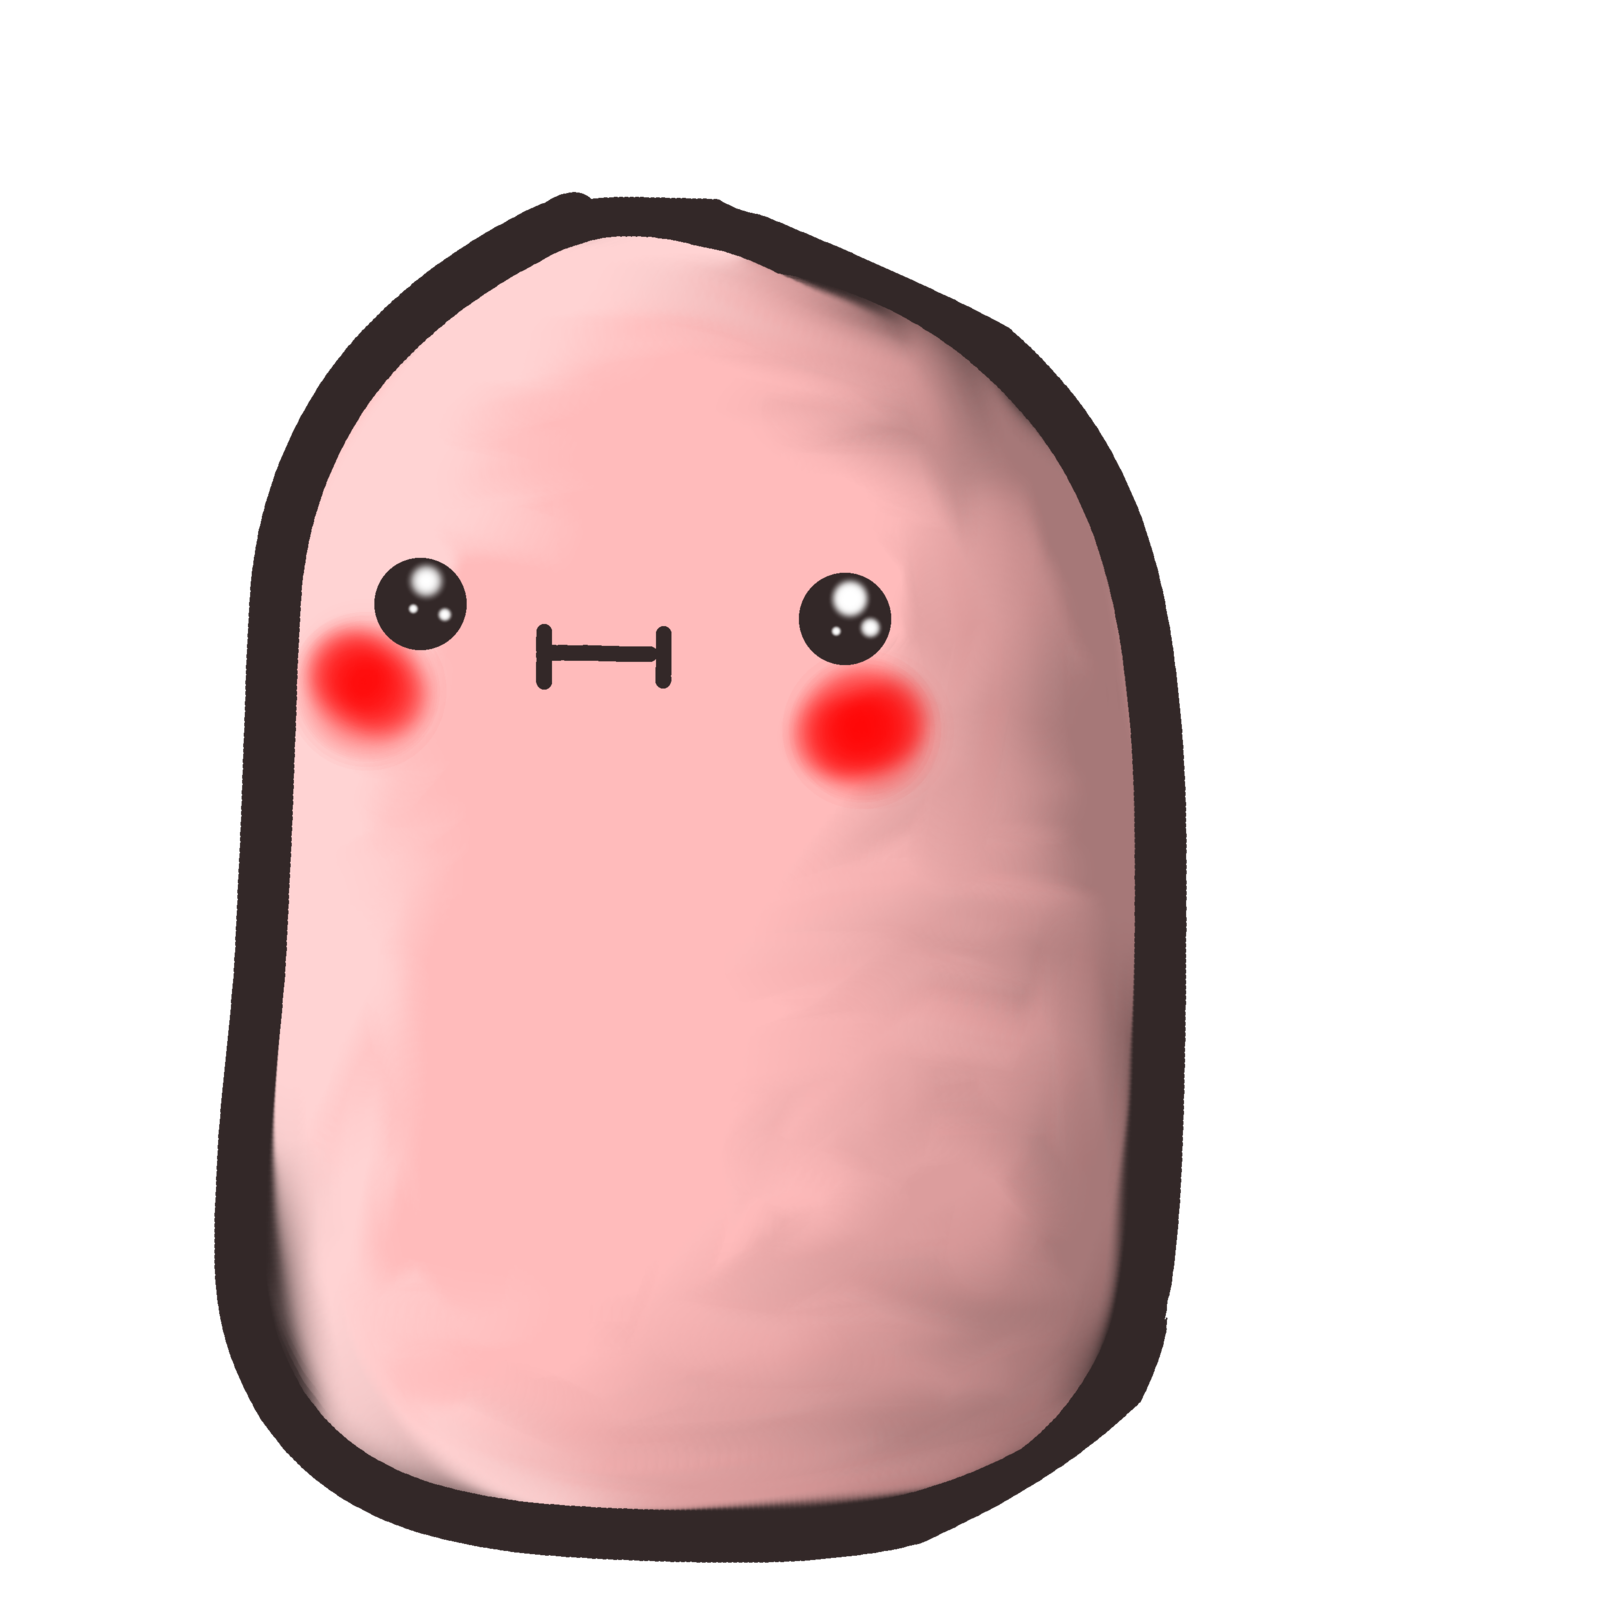 A Spud Who Is Kawaii by ArcaneQueen on DeviantArt